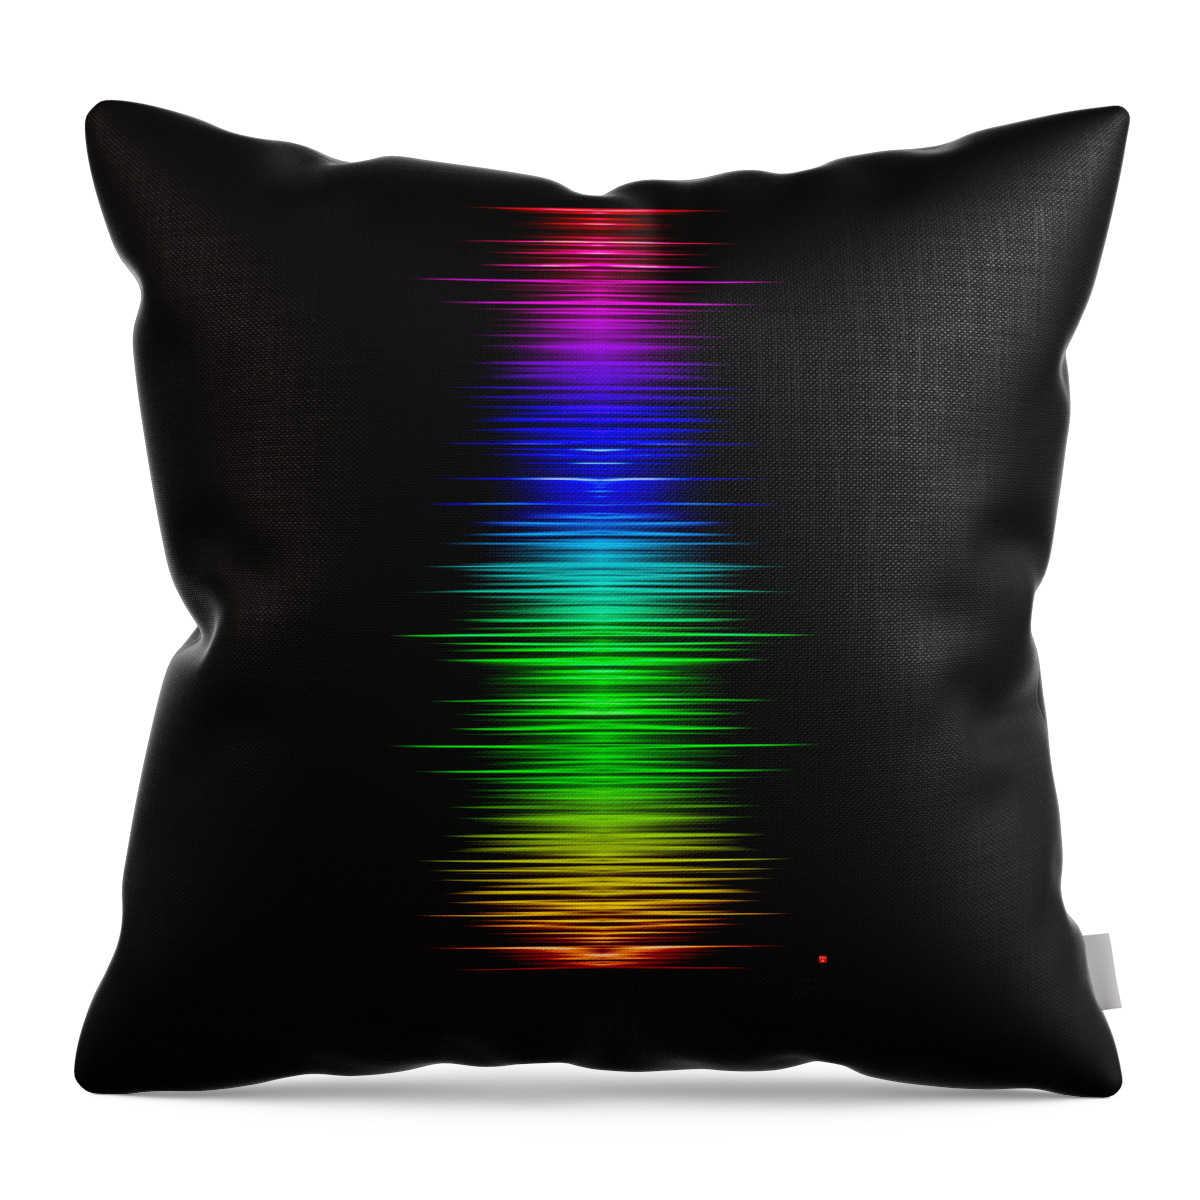 Multi-colored Rendition Of A Sound Wave. Throw Pillow featuring the painting Soundscape 8 by Ran Andrews